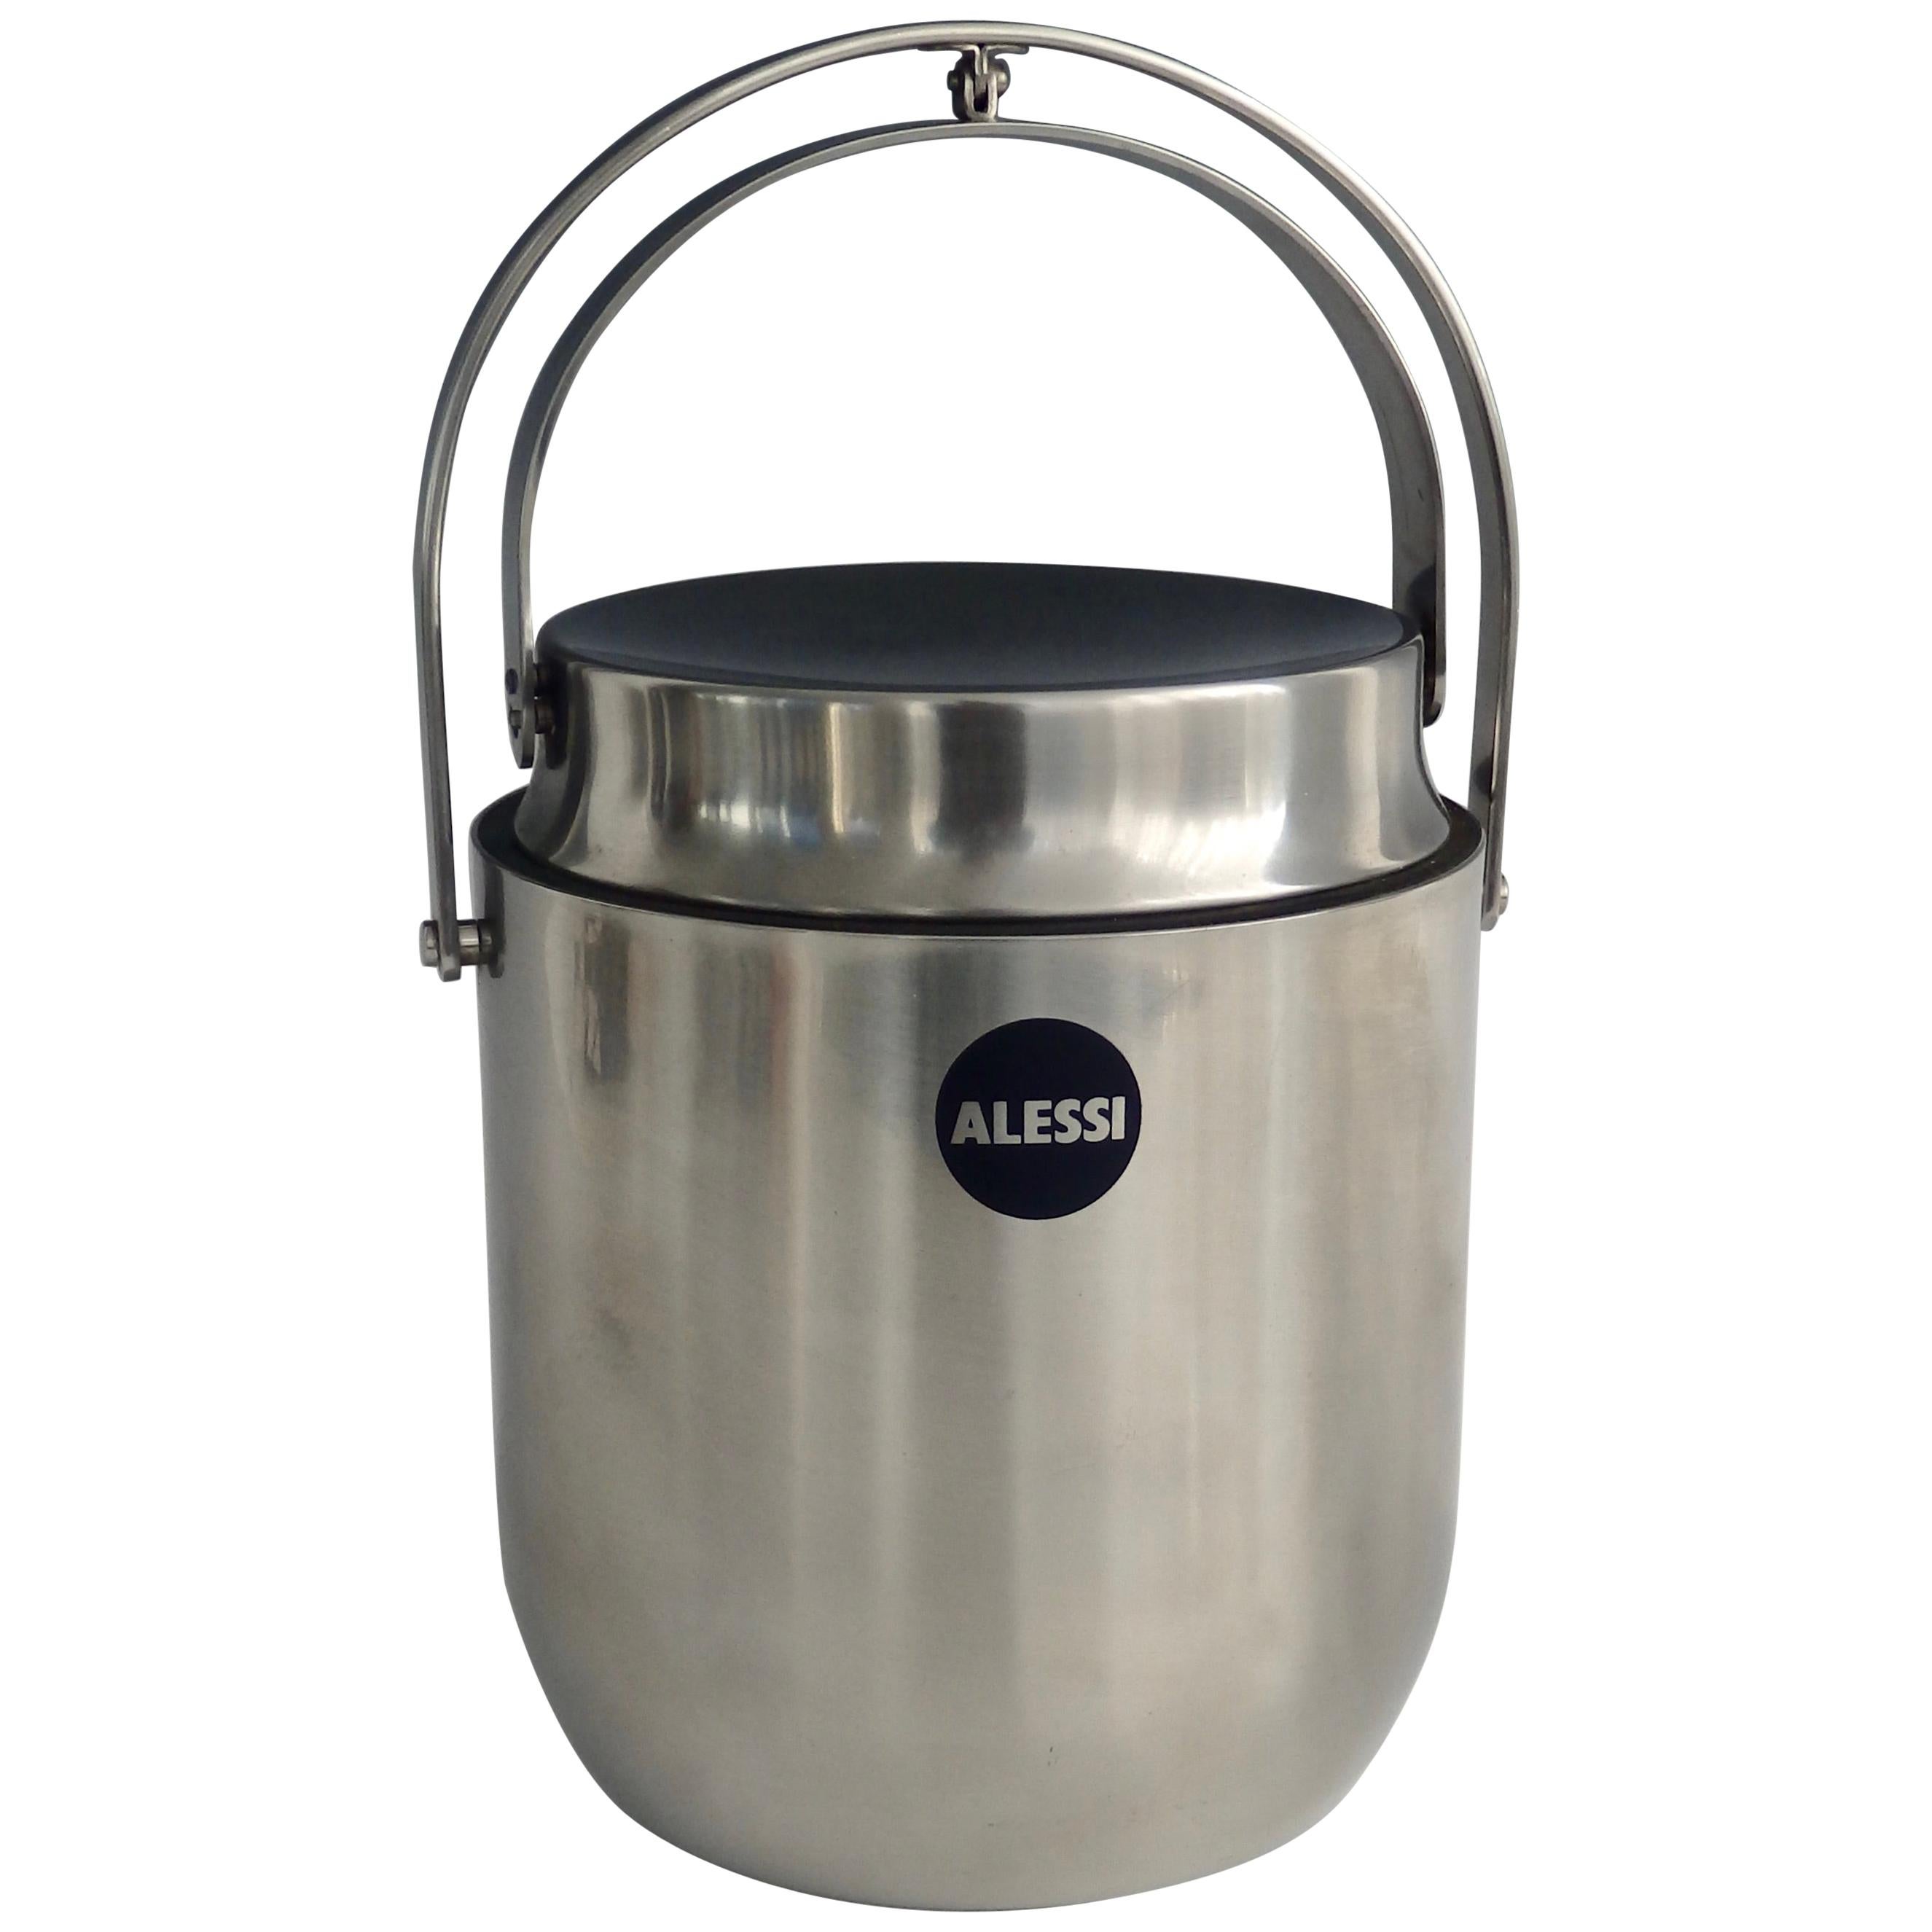 Alessi Italy Stainless Steel Ice Bucket with Mechanical Lid